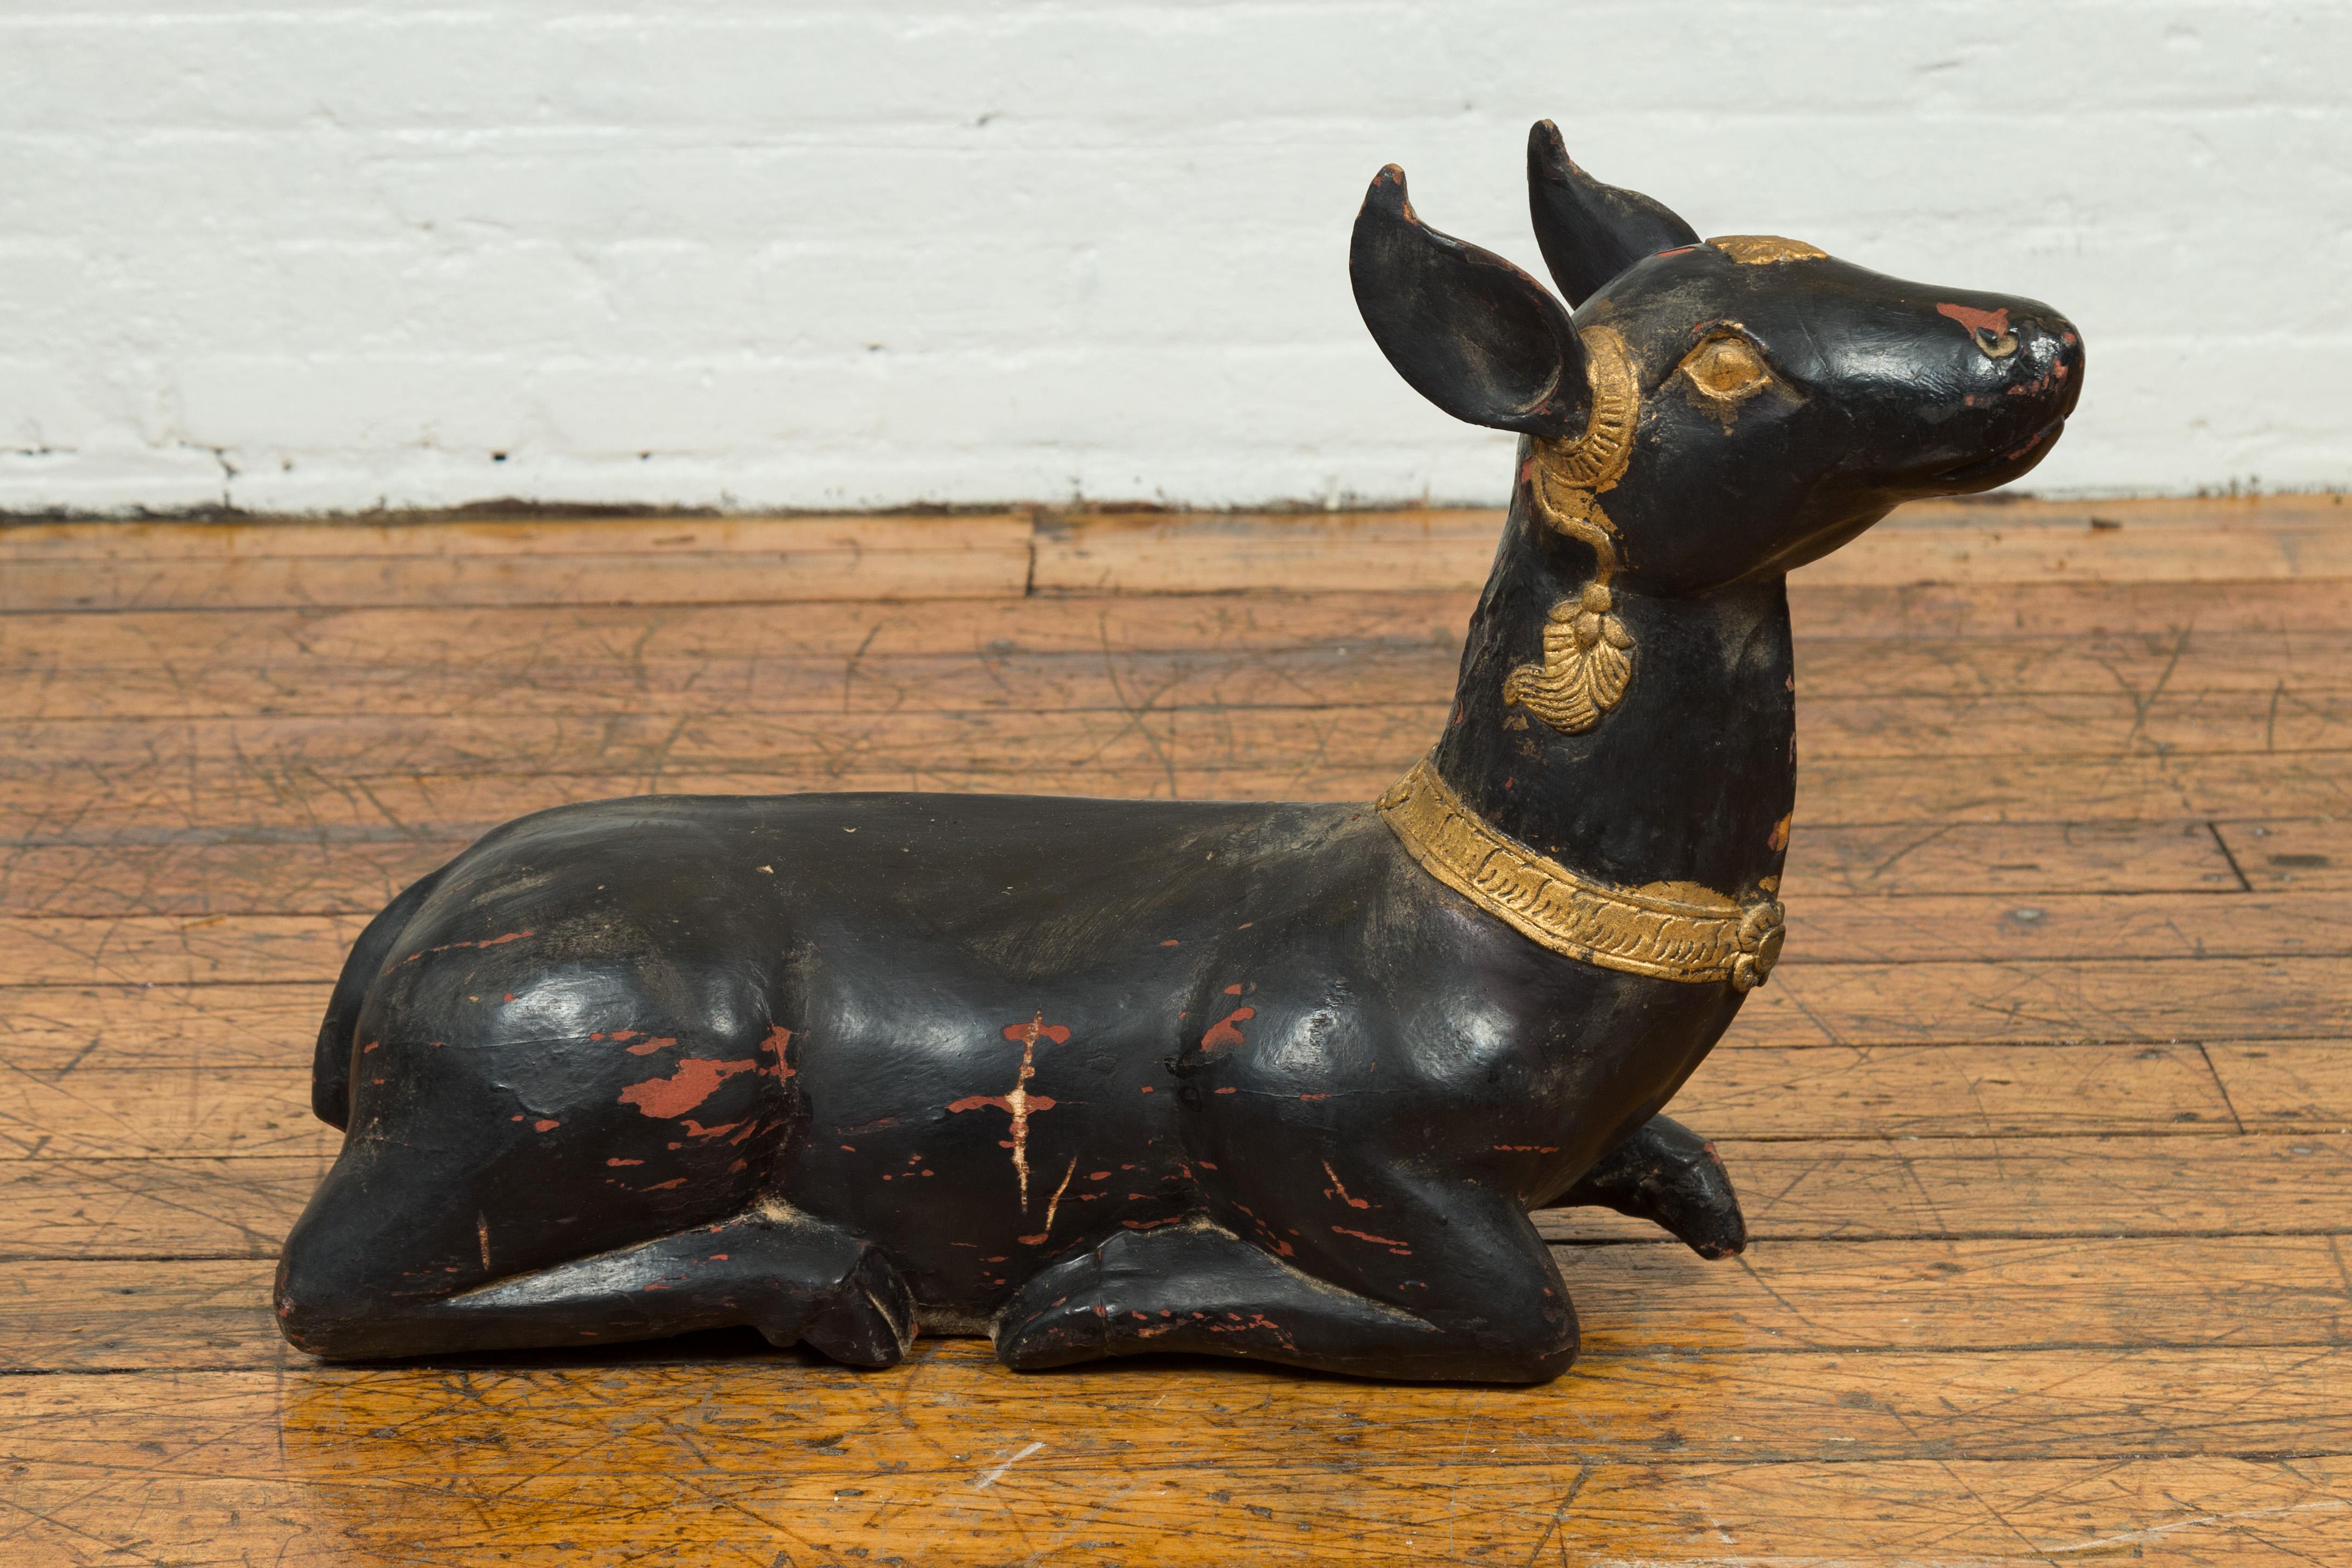 A vintage Thai black lacquered goat sculpture from the mid-20th century, with gold highlights and ornate motifs. Crafted in Thailand during the midcentury period, this wooden goat sculpture features a black lacquered body showing good signs of